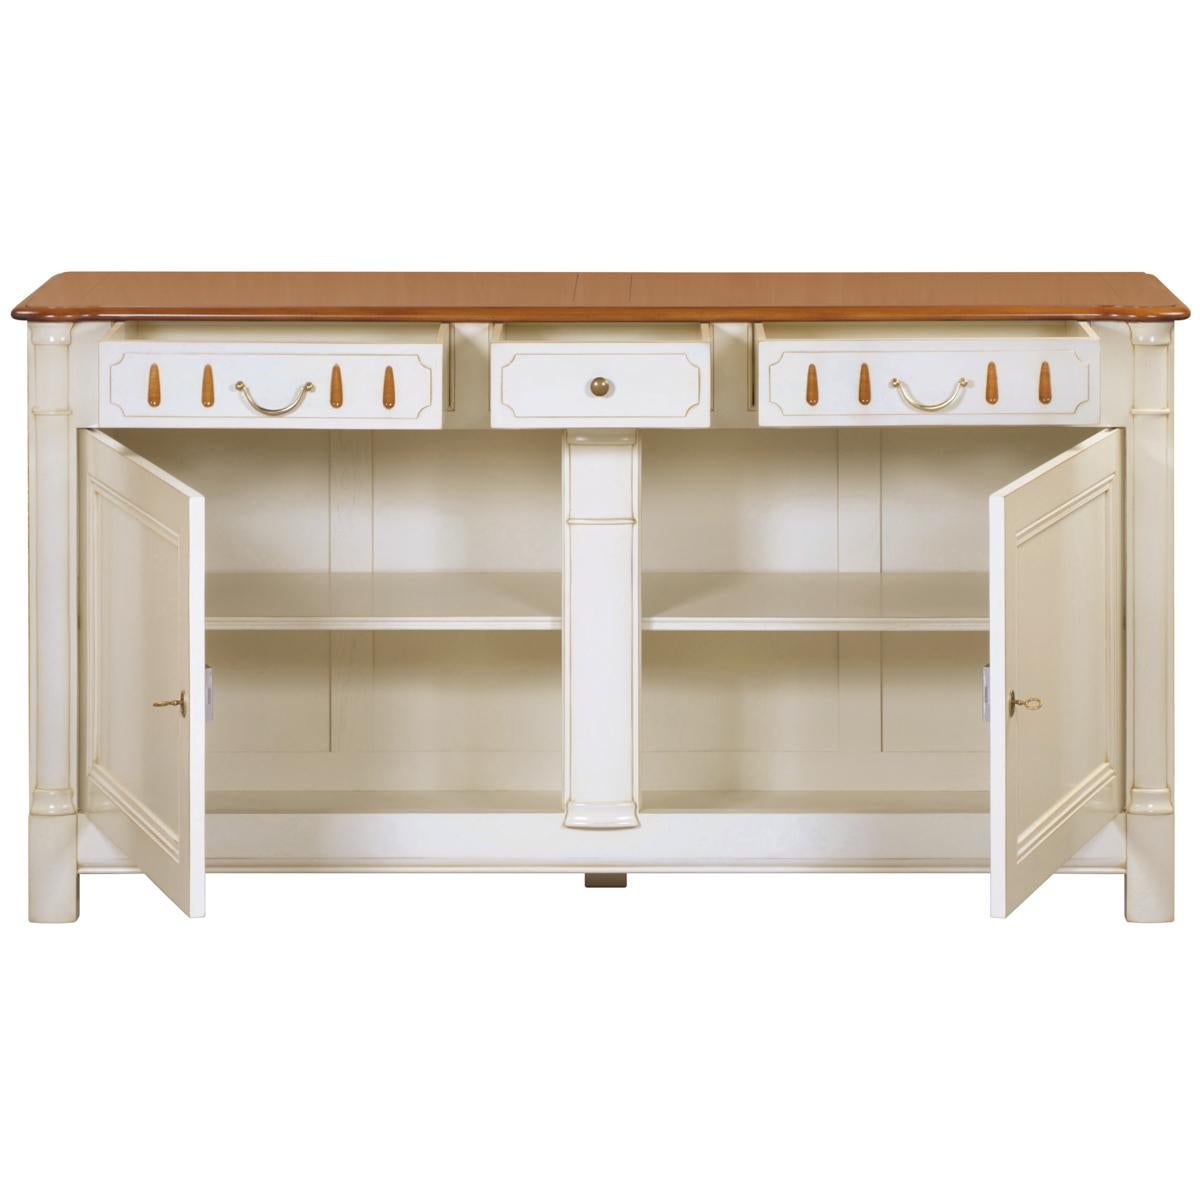 Hand-Crafted French Tradition 2-Door Buffet in Cherry, 3 Drawers and White-Cream Lacquered For Sale